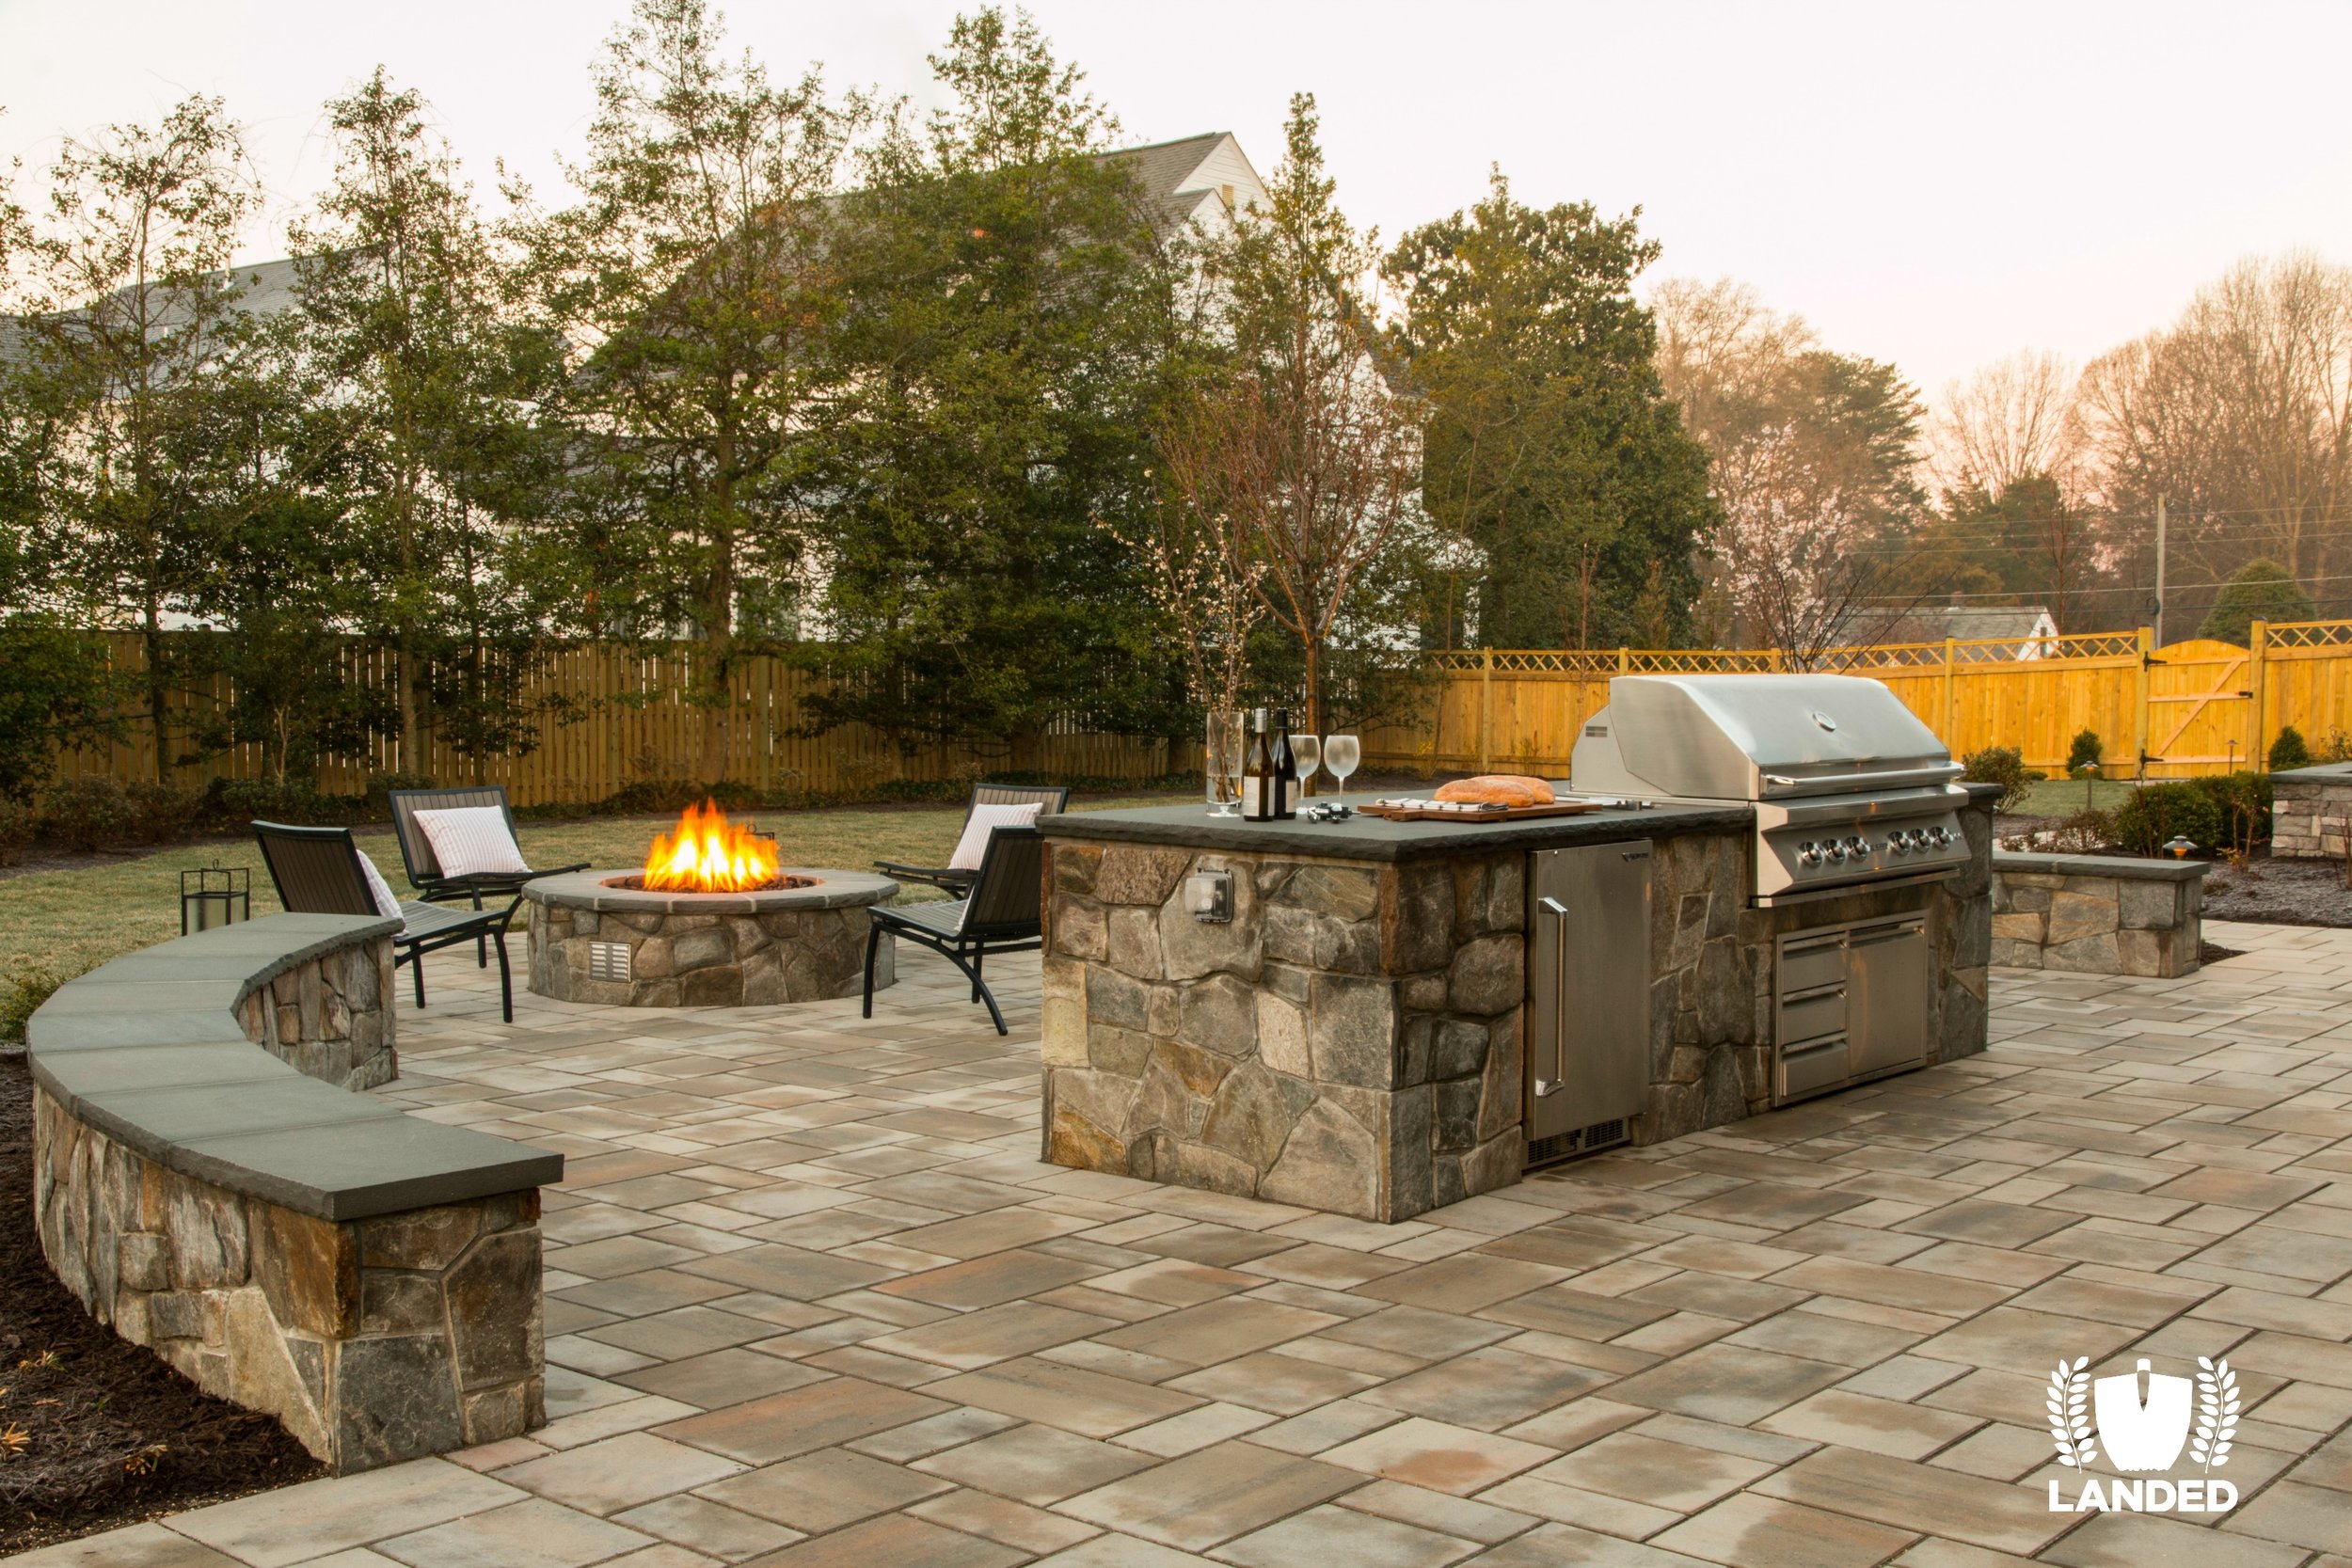  Timber frame outdoor patio, fireplace, dining bar, kitchen and fire pit. Techo Bloc pavers. 